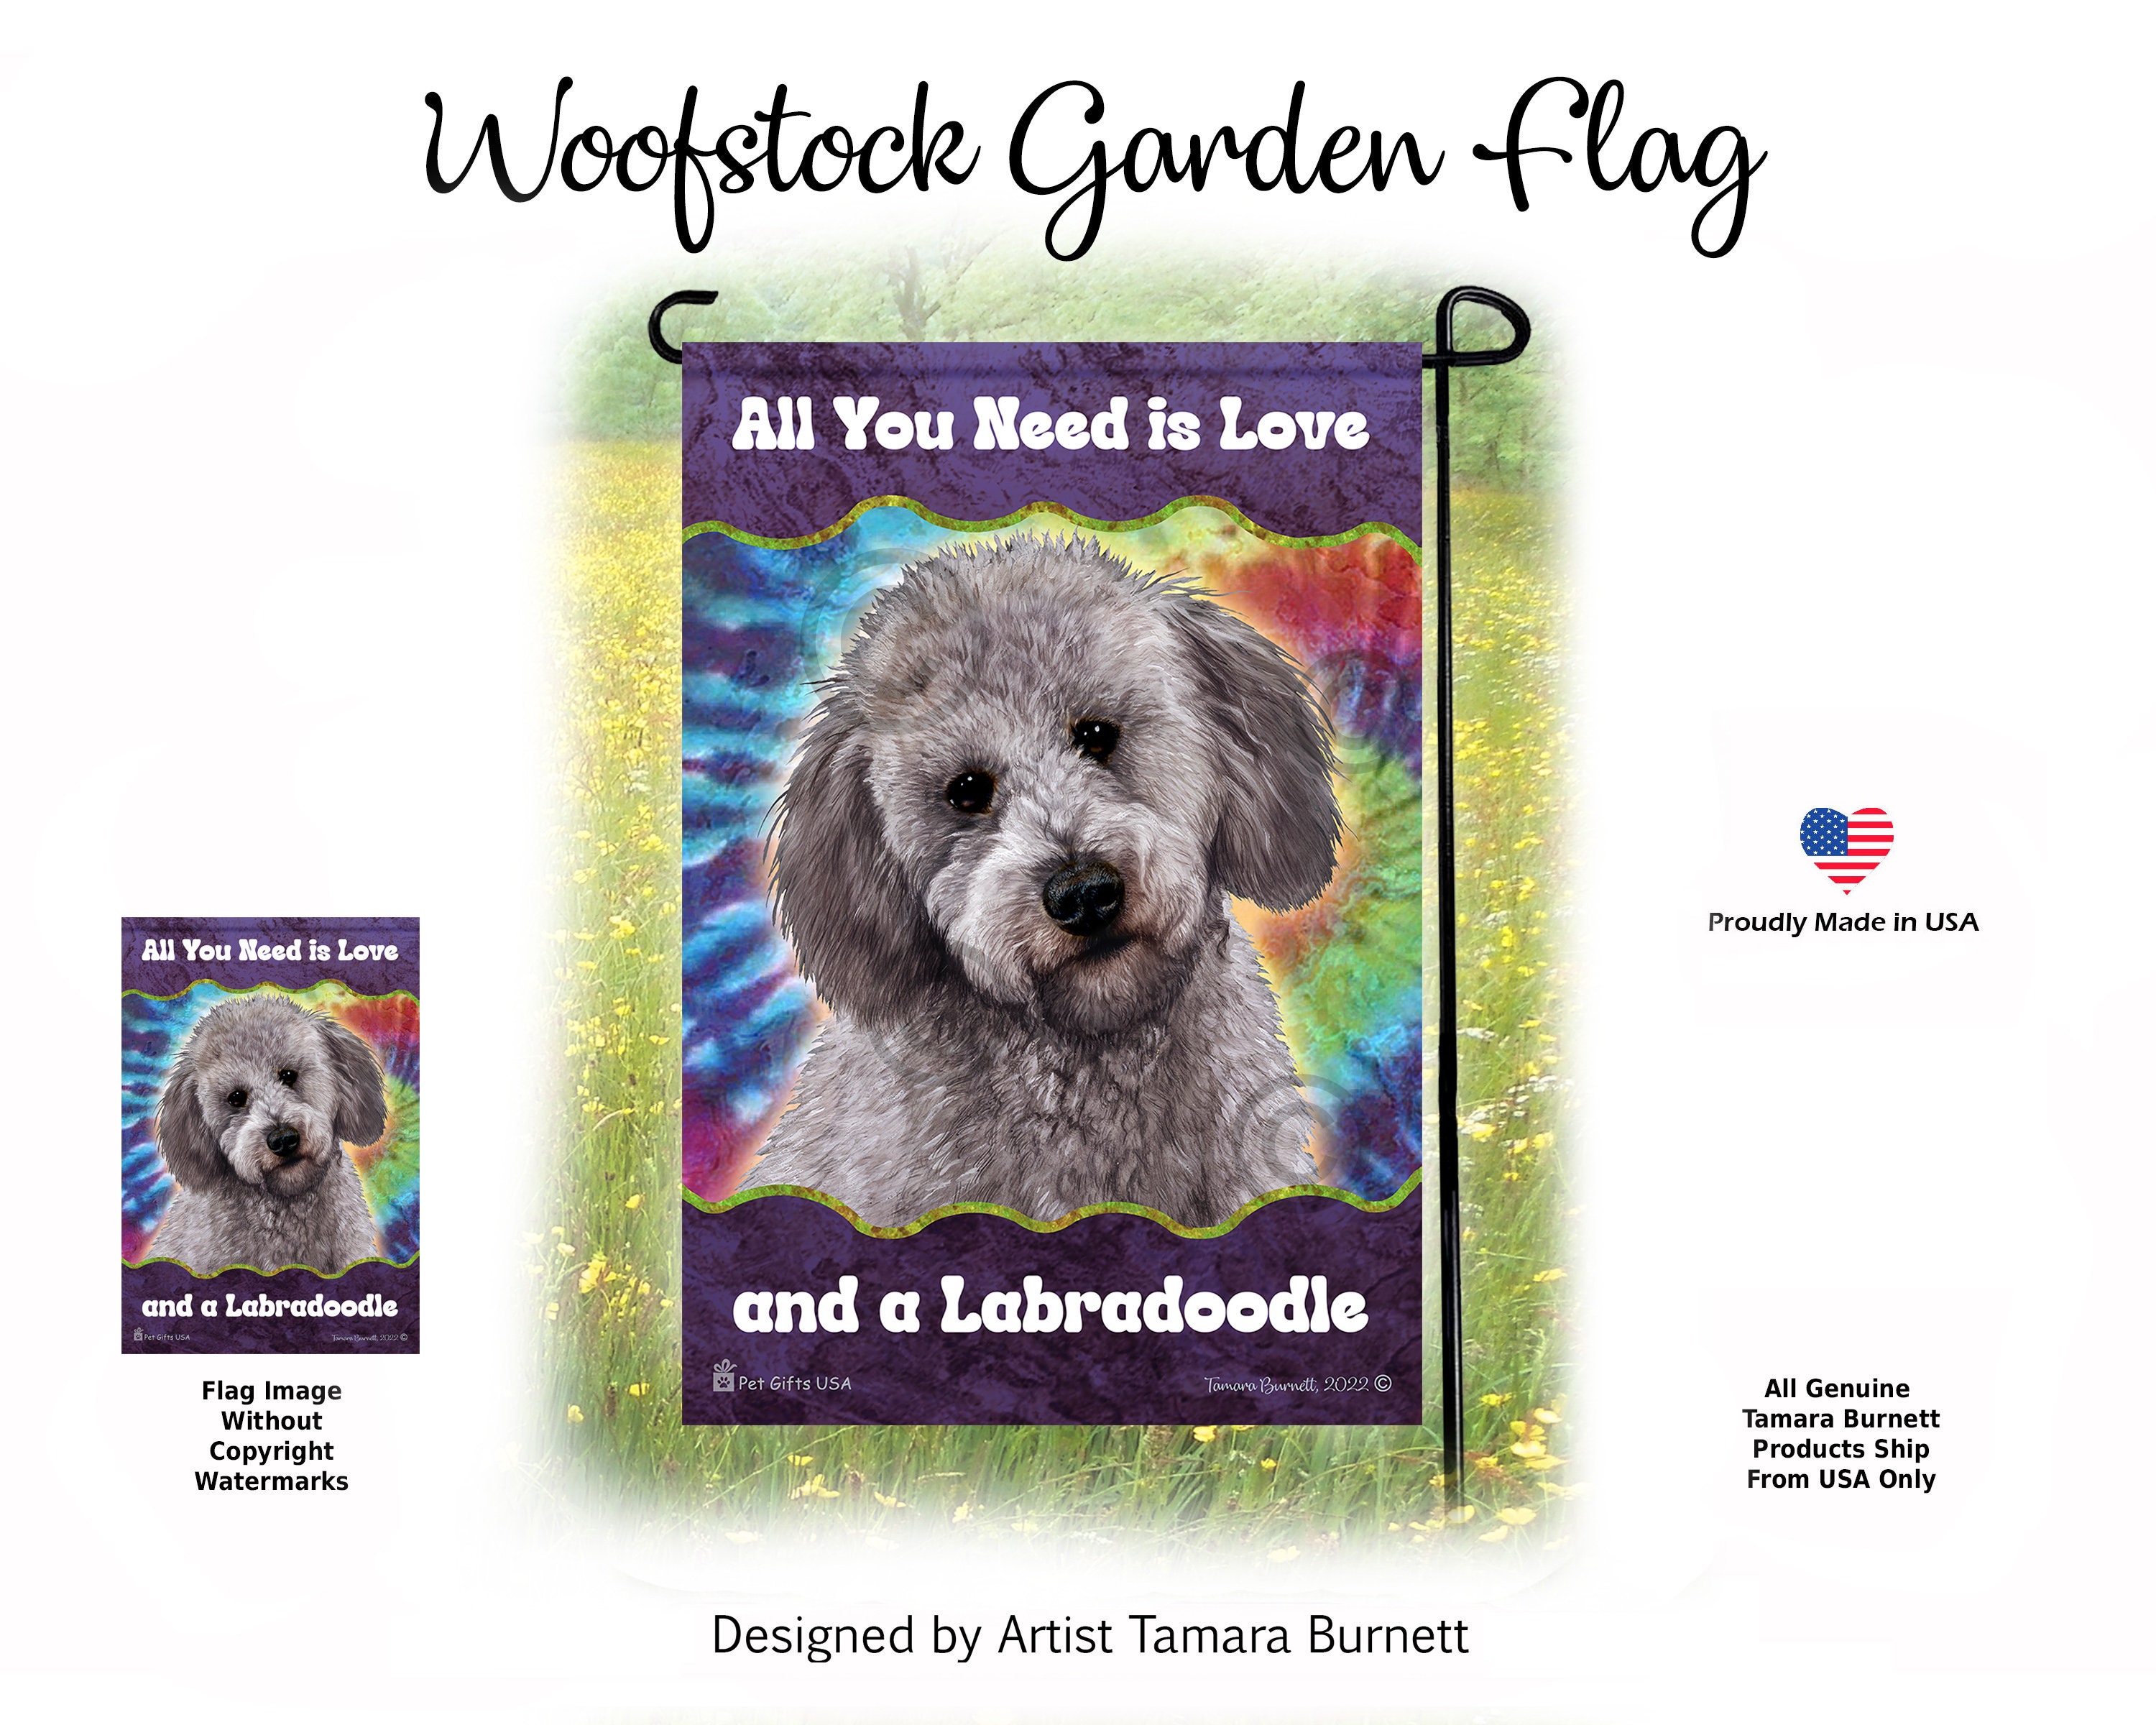 All You Need is Love and a Labradoodle Grey Poodle hq nude photo